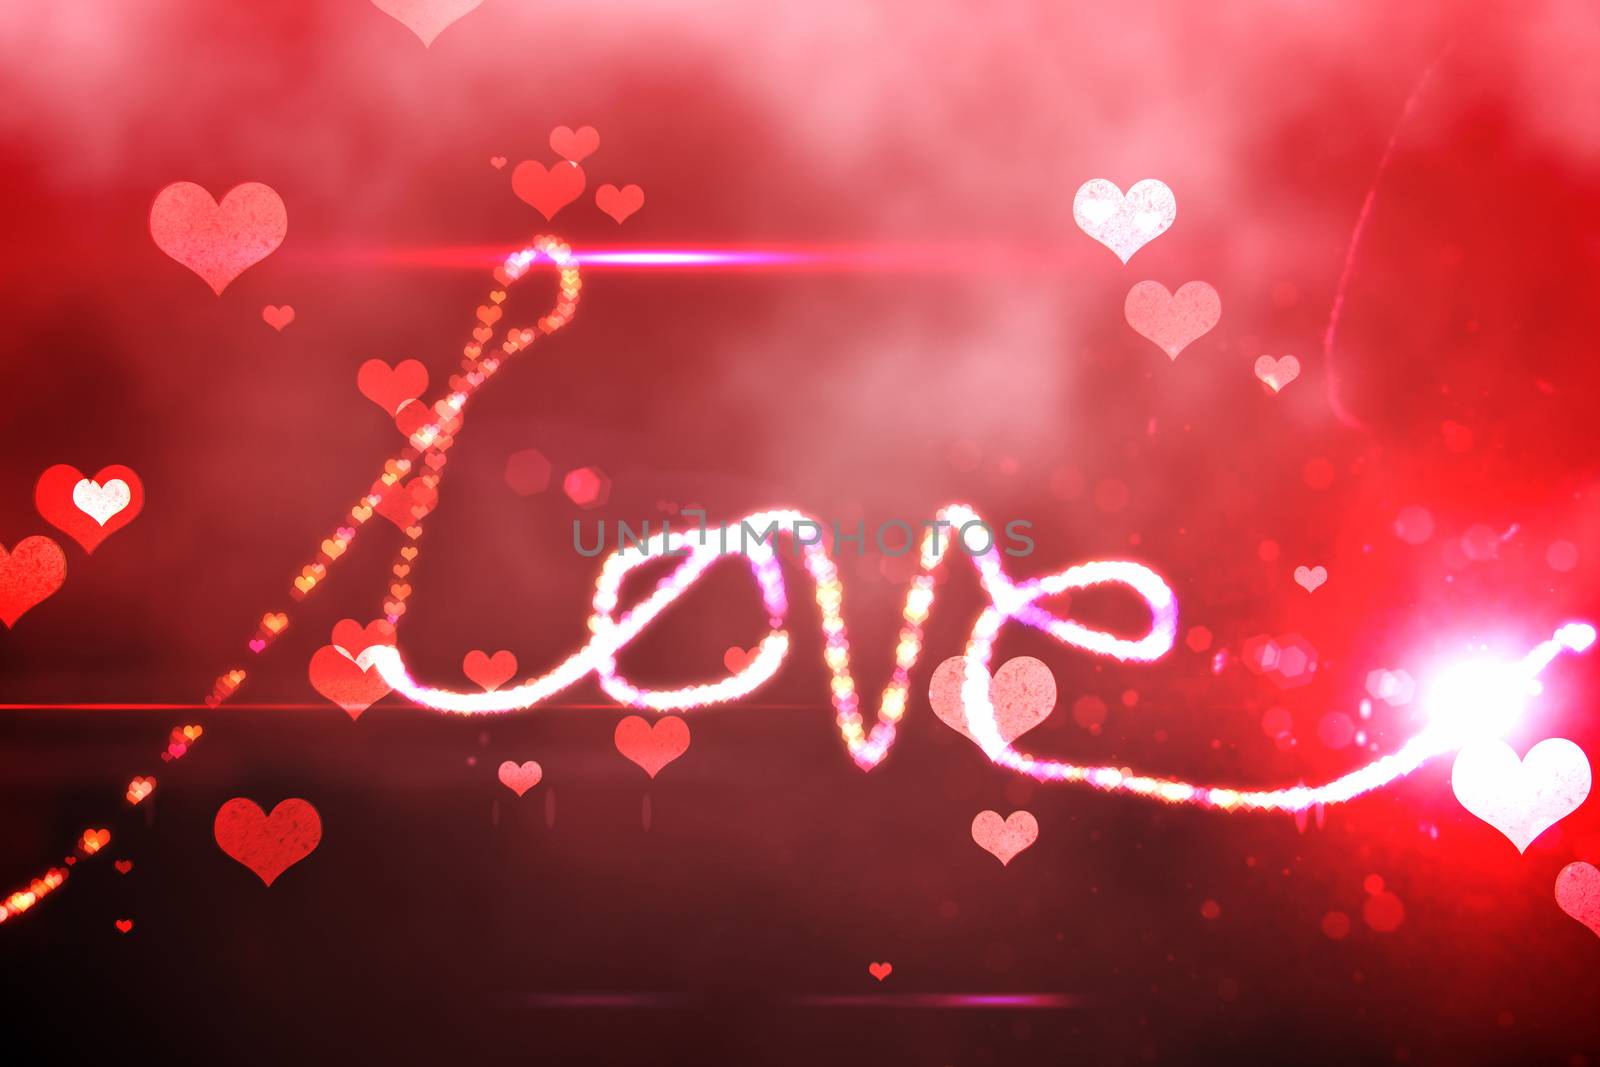 Digitally generated love background in red